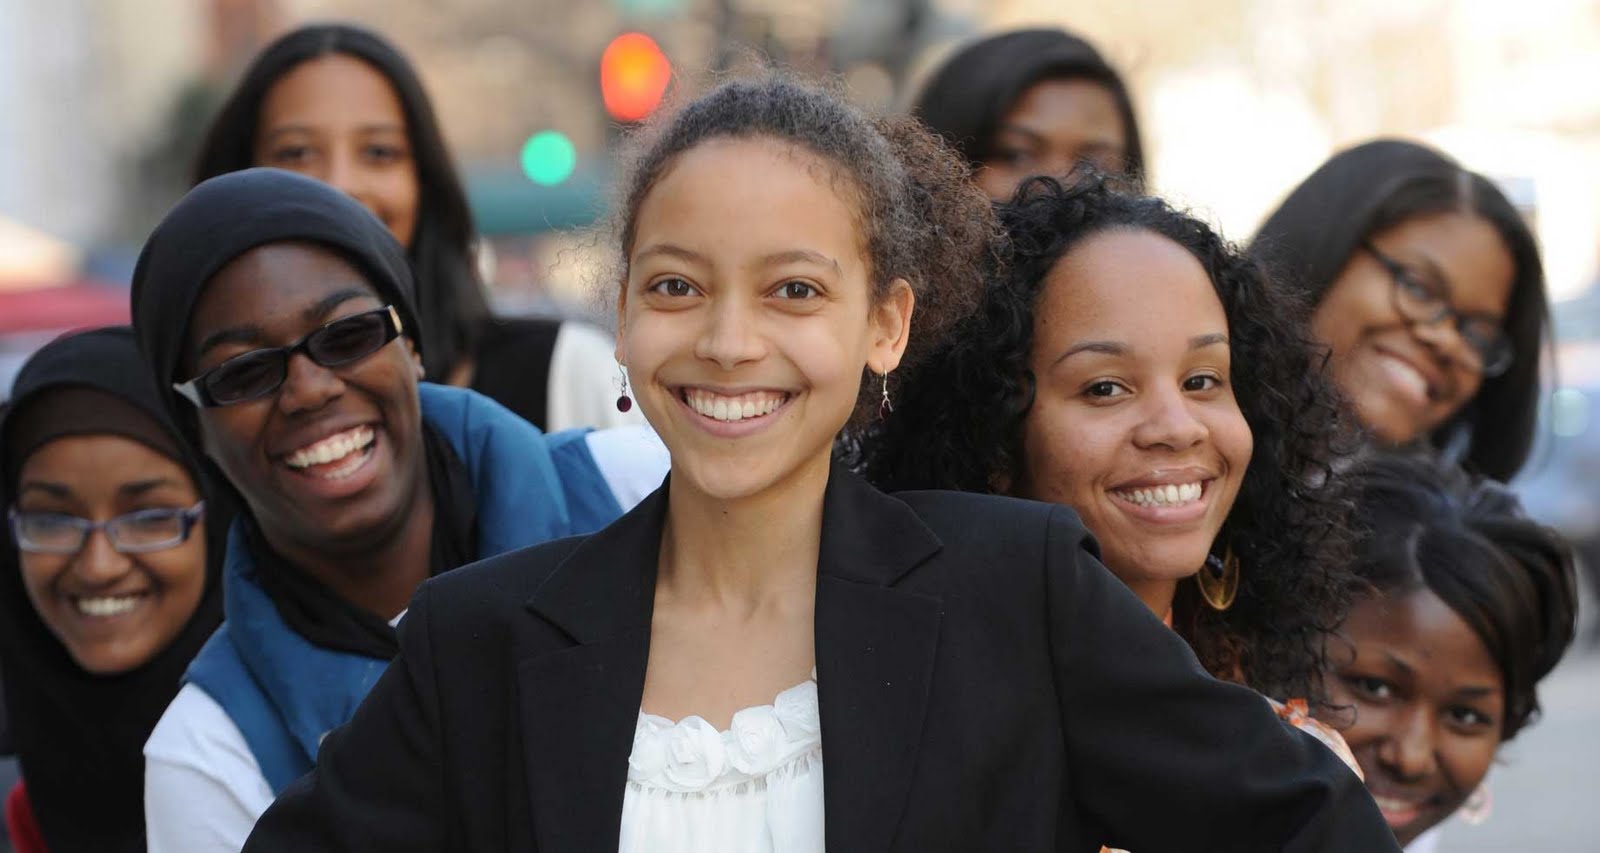 Study shows African Immigrants as significant contributors to U.S. economy